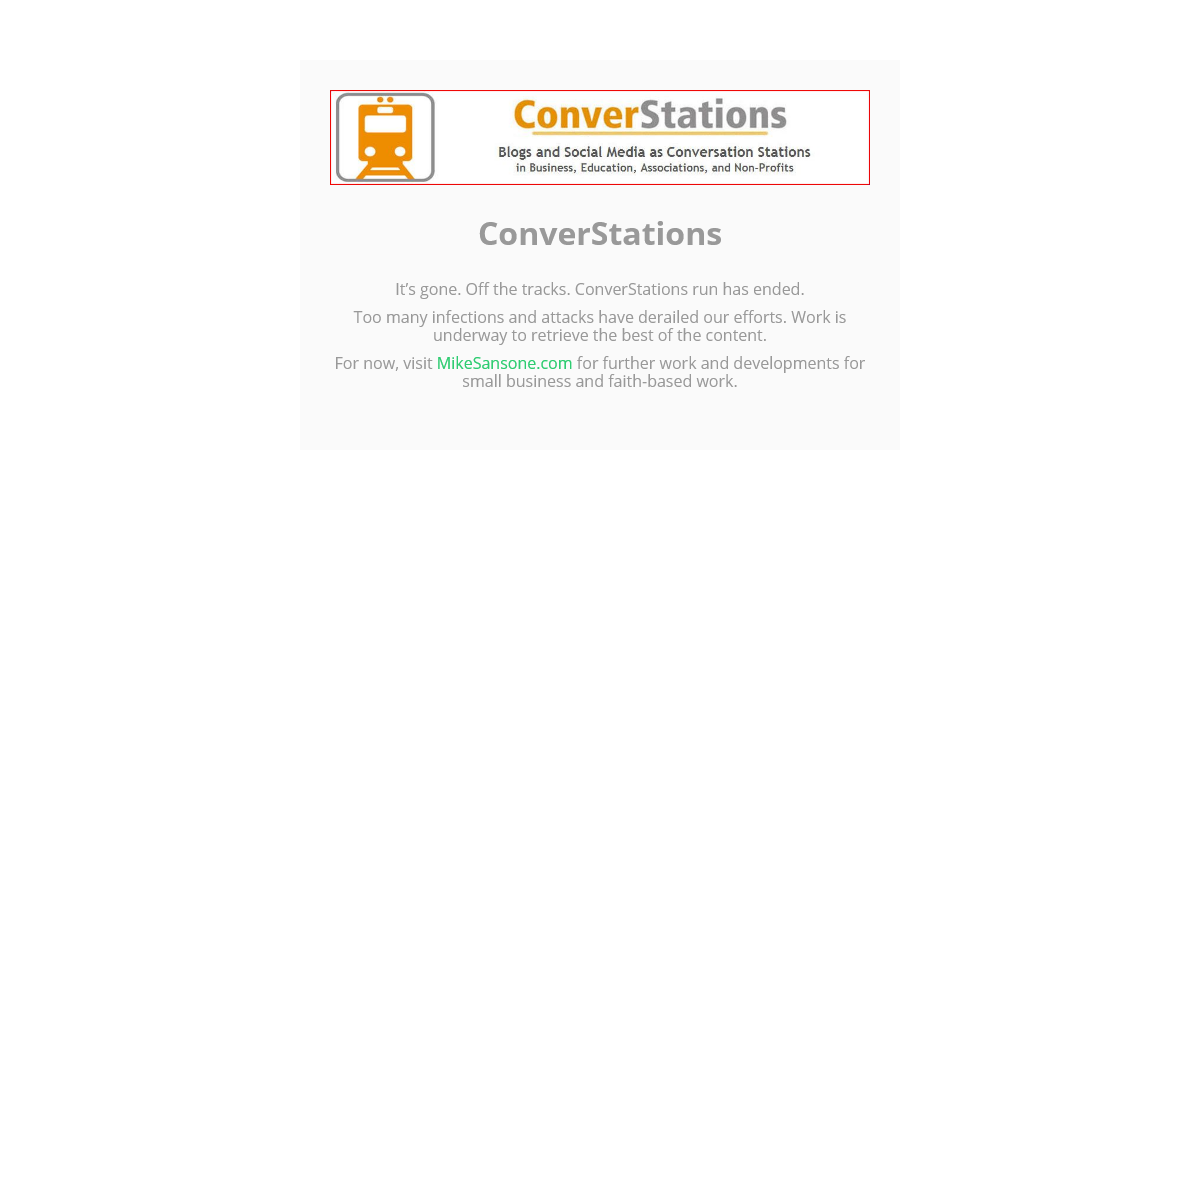 A complete backup of converstations.com